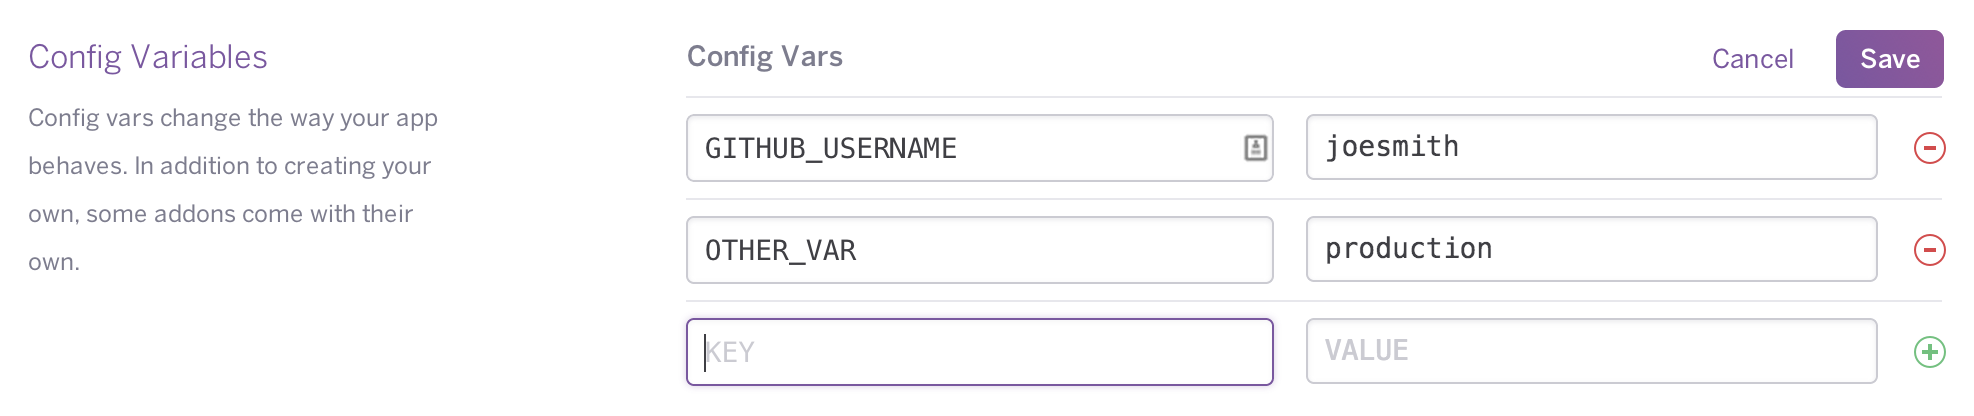 Config Vars in Dashboard